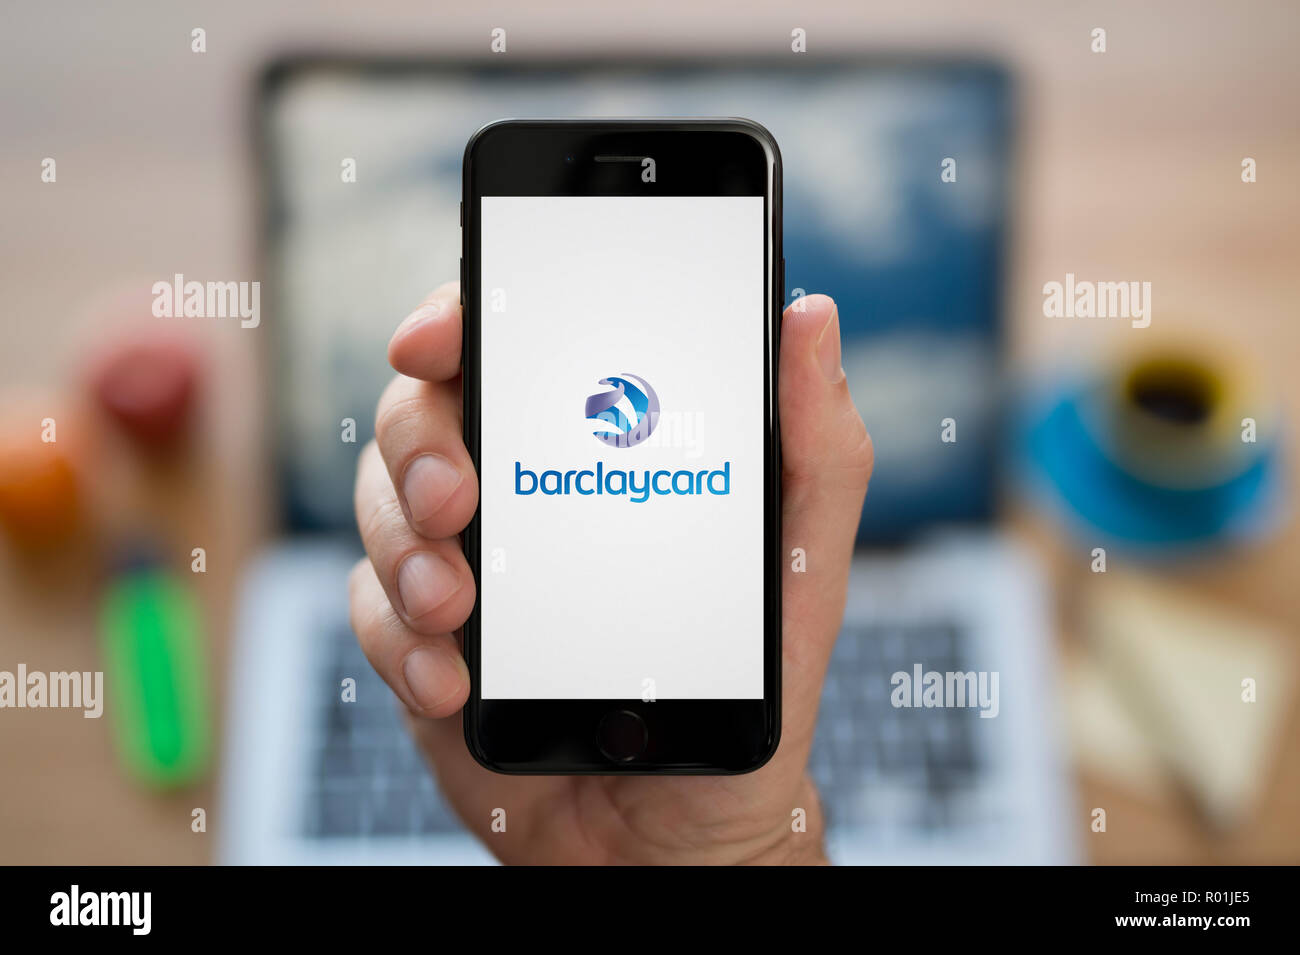 A man looks at his iPhone which displays the Barclaycard logo, while sat at his computer desk (Editorial use only). Stock Photo